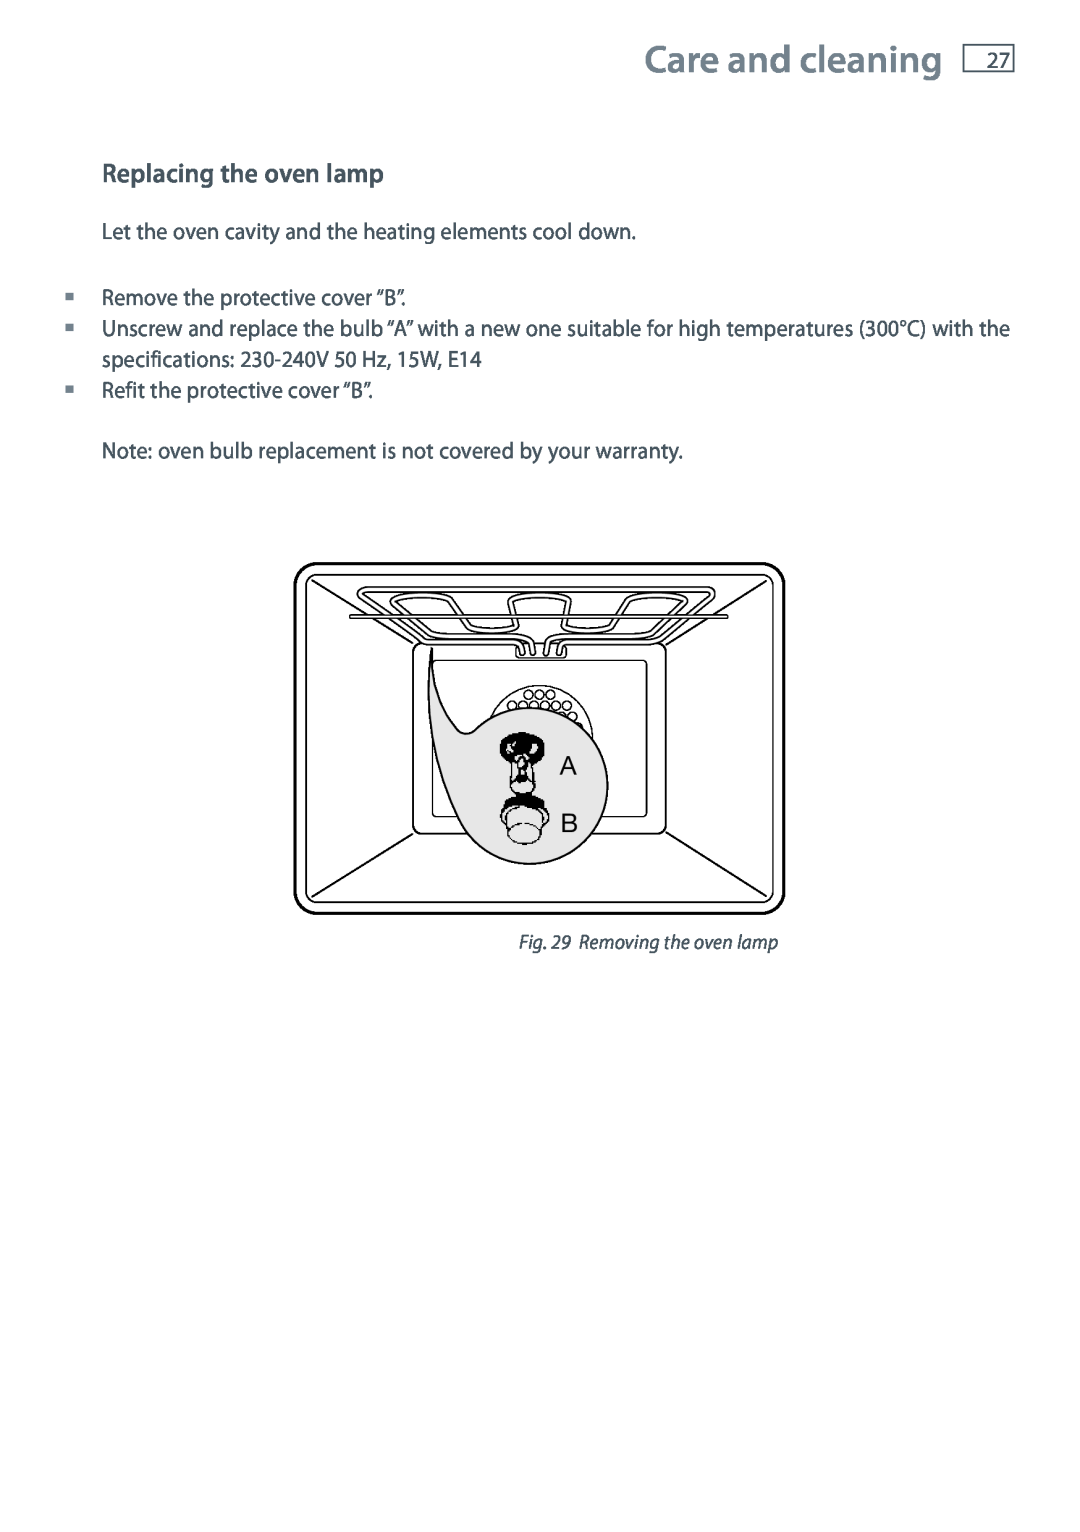 Fisher & Paykel 60 installation instructions Replacing the oven lamp, Care and cleaning, Removing the oven lamp 